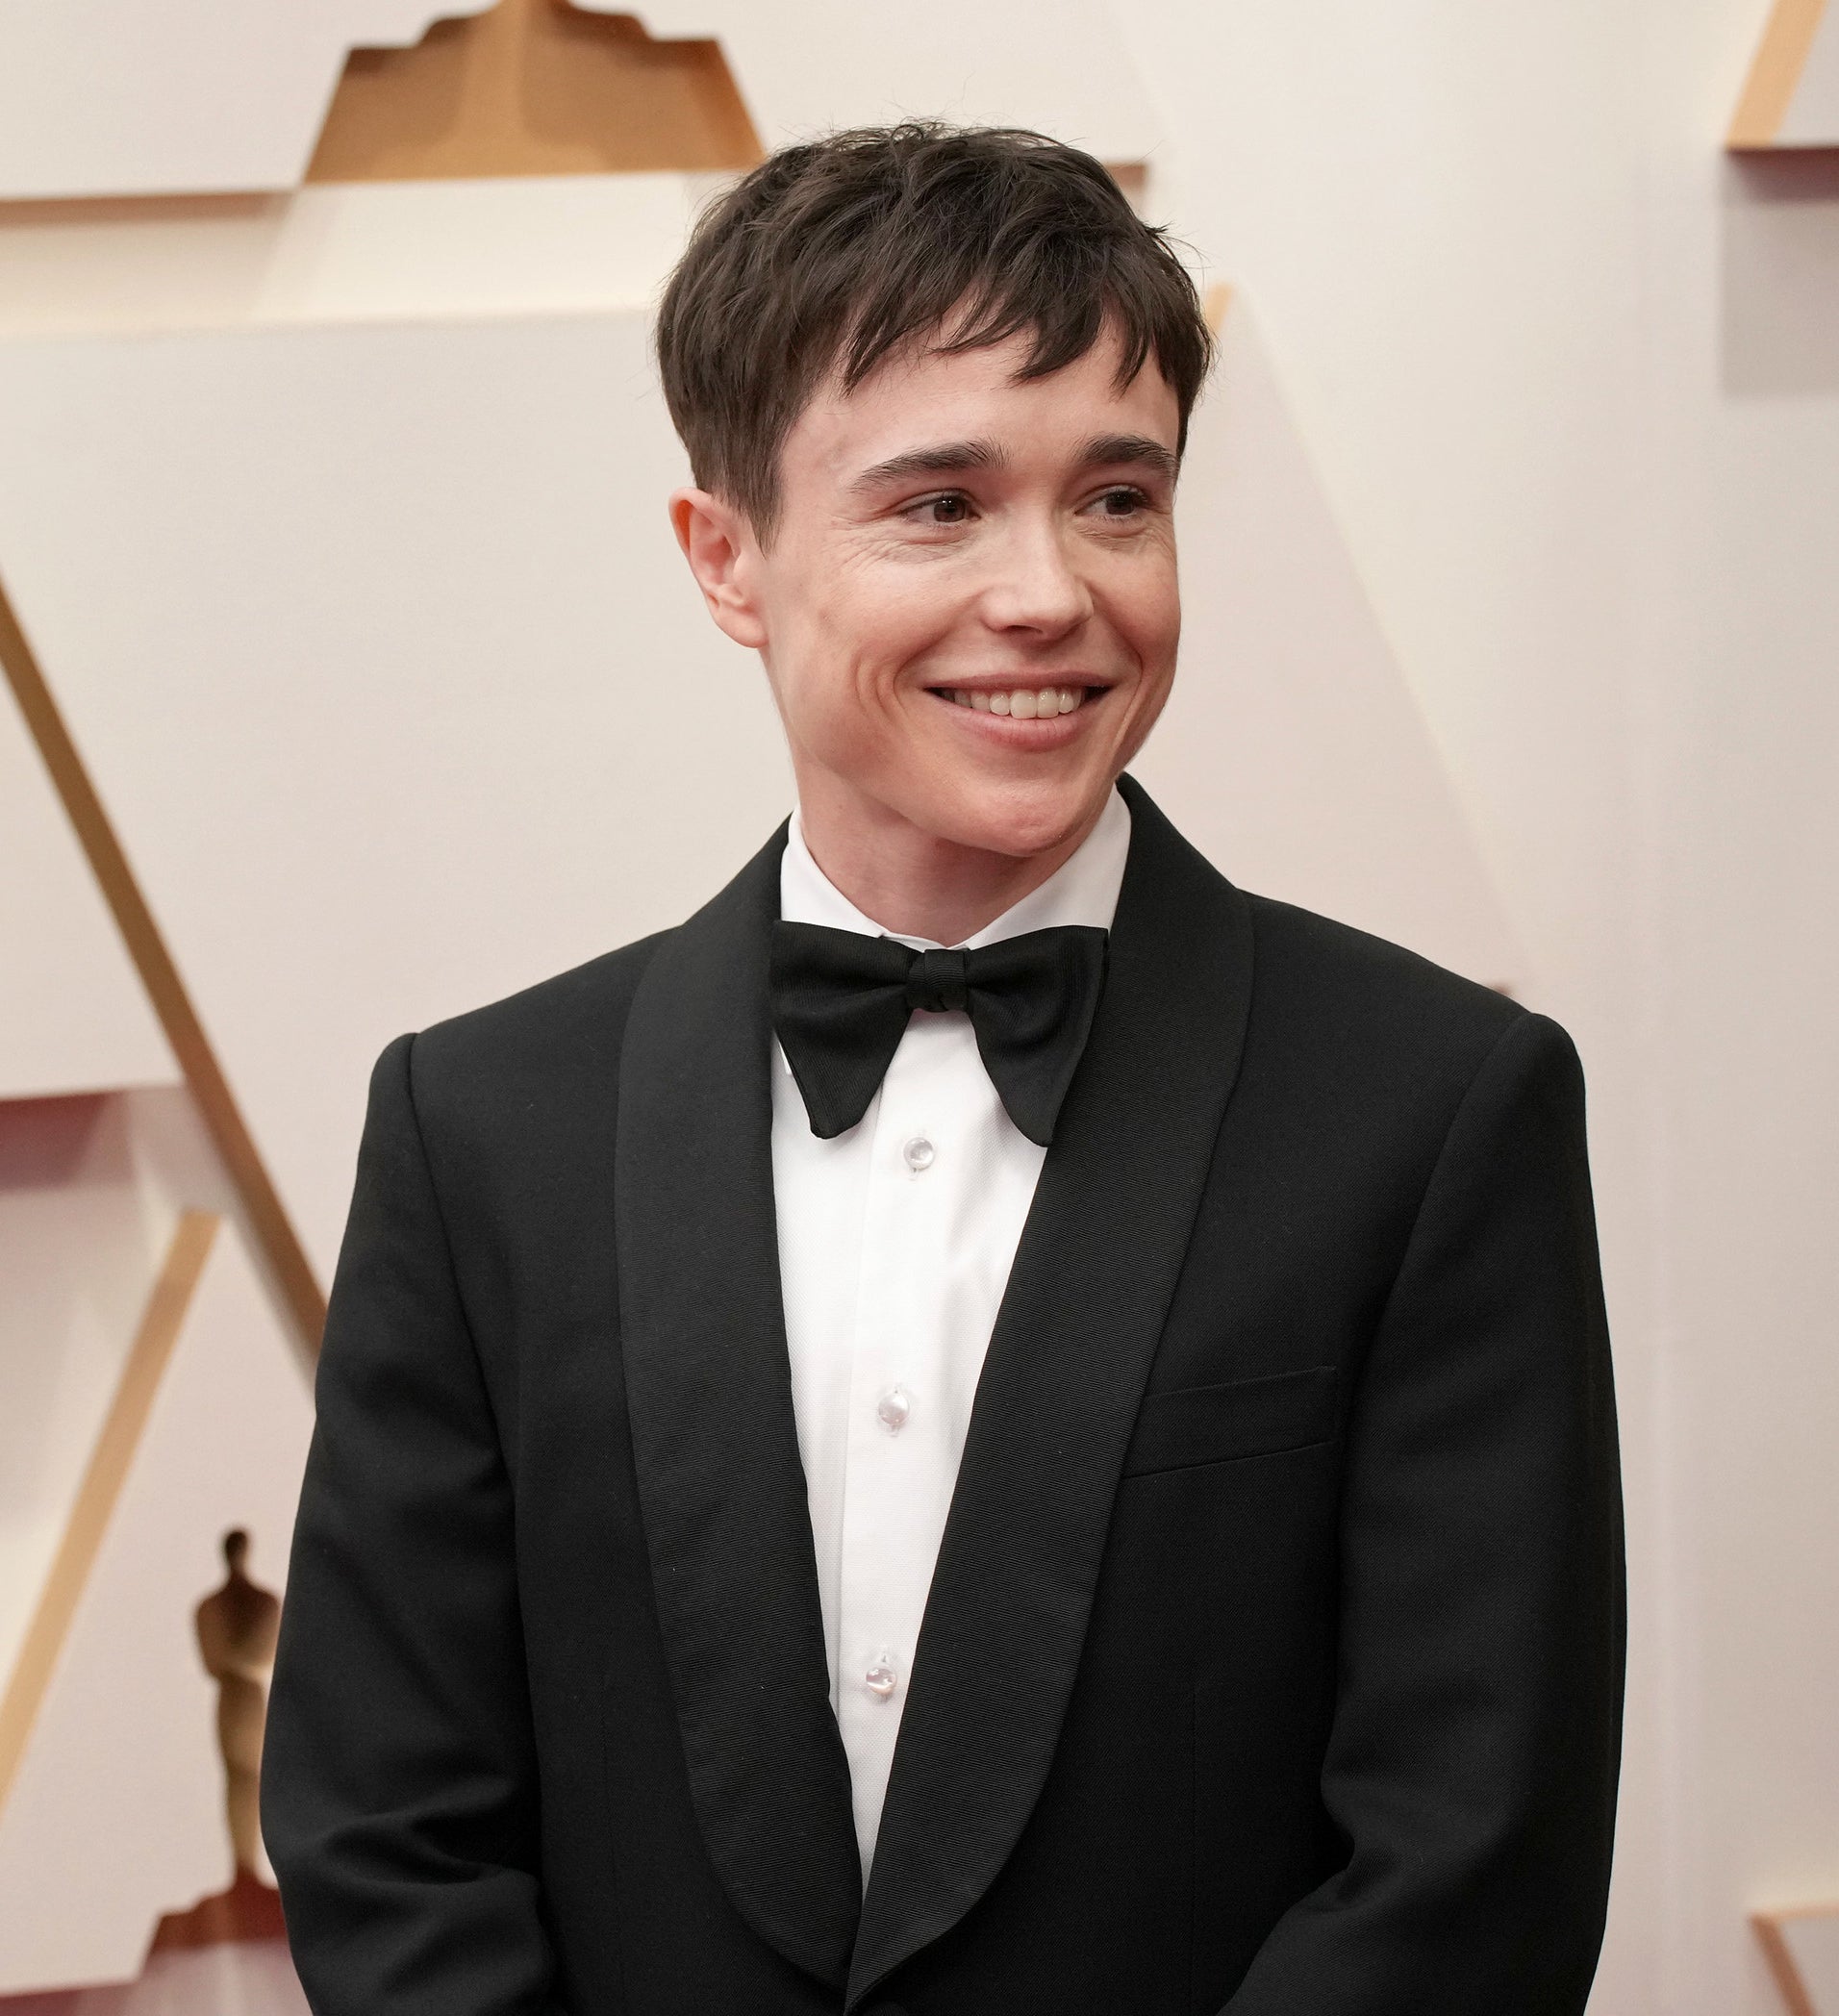 Close-up of Elliot smiling in a suit and bow tie